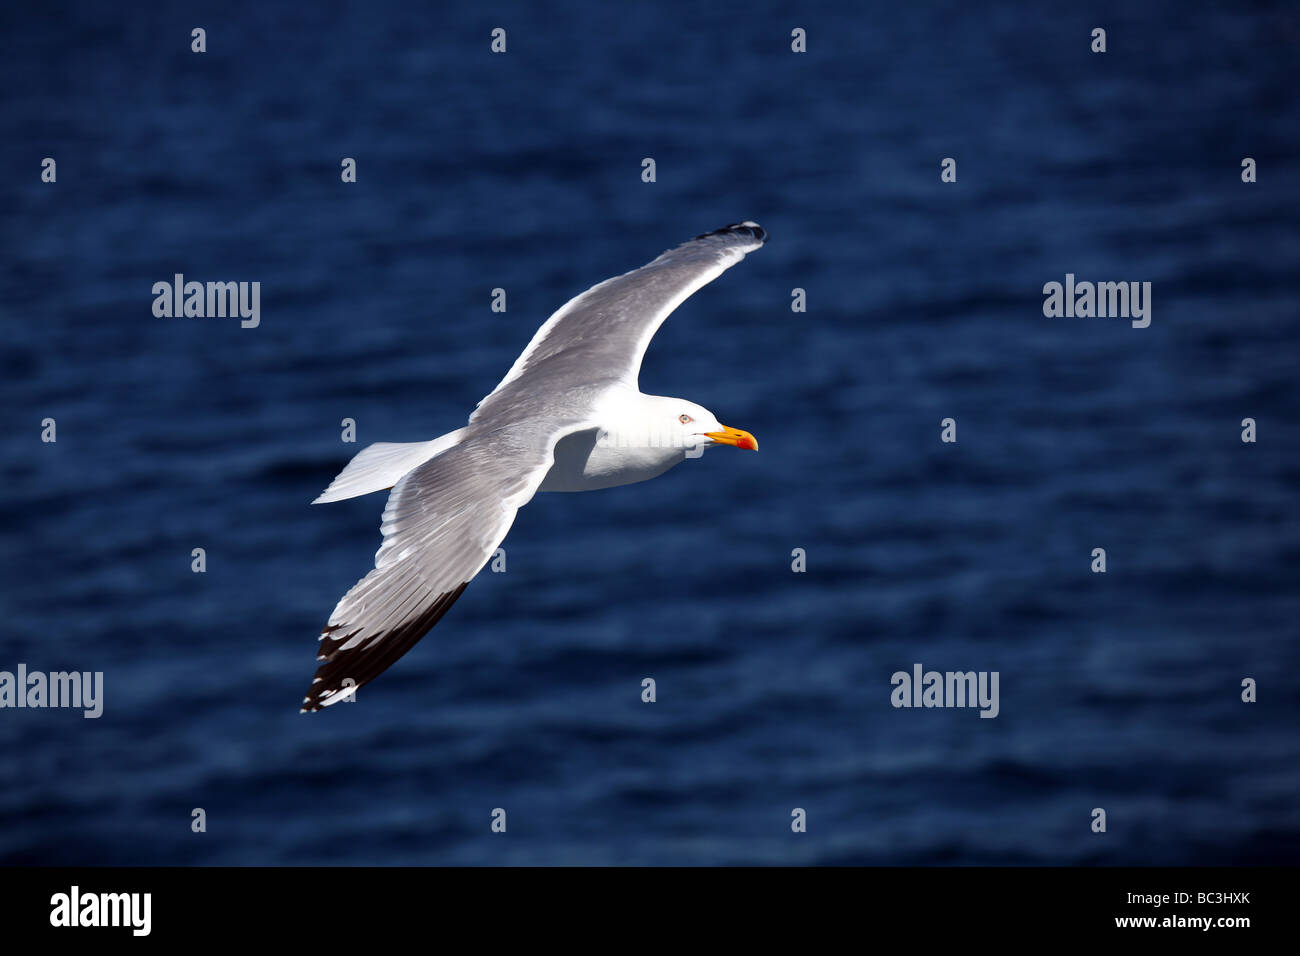 Seagull flying over the blue sea Stock Photo